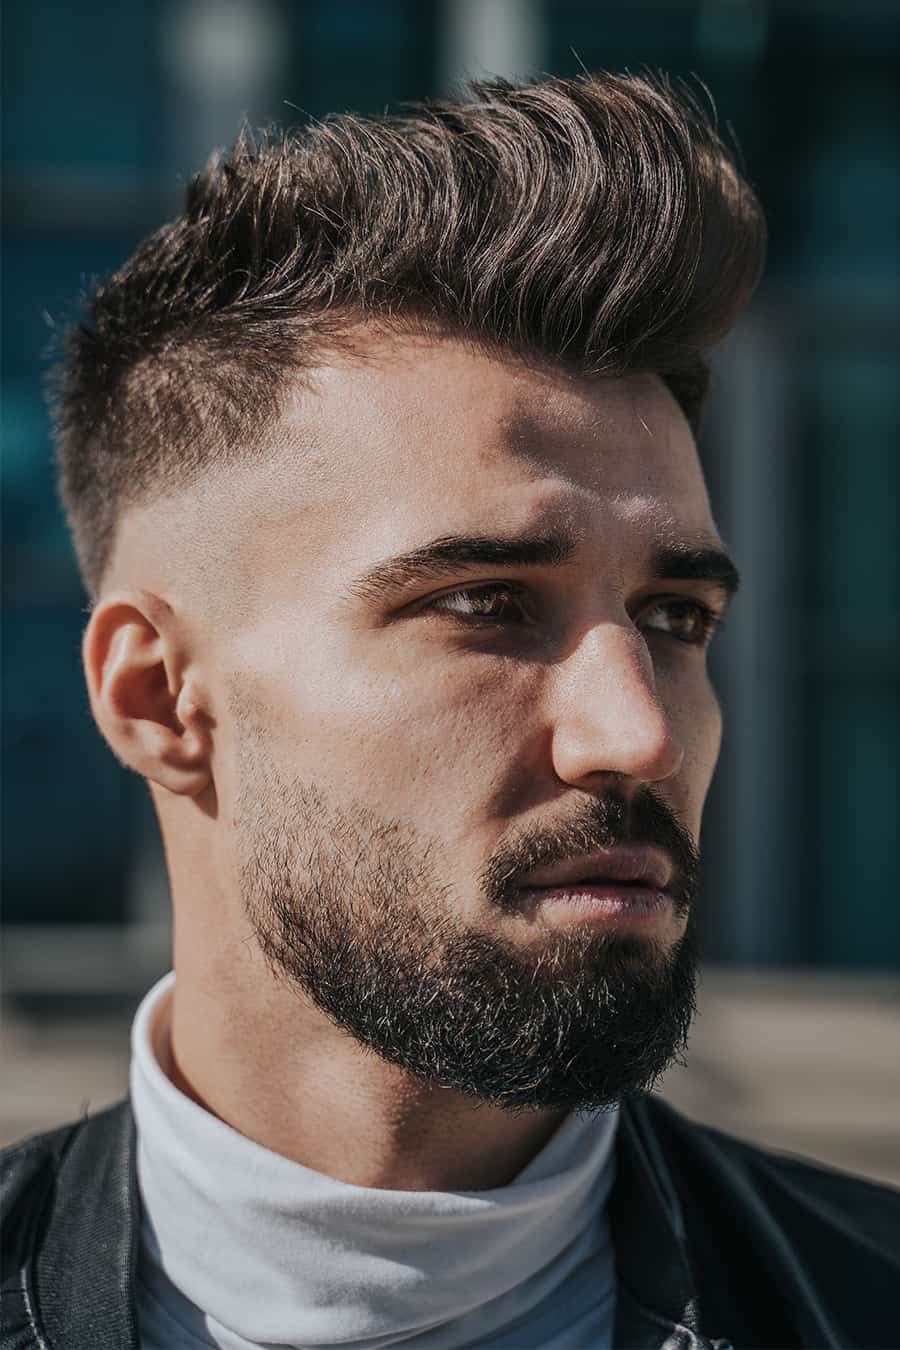 Men's high pompadour haircut with mid bald fade